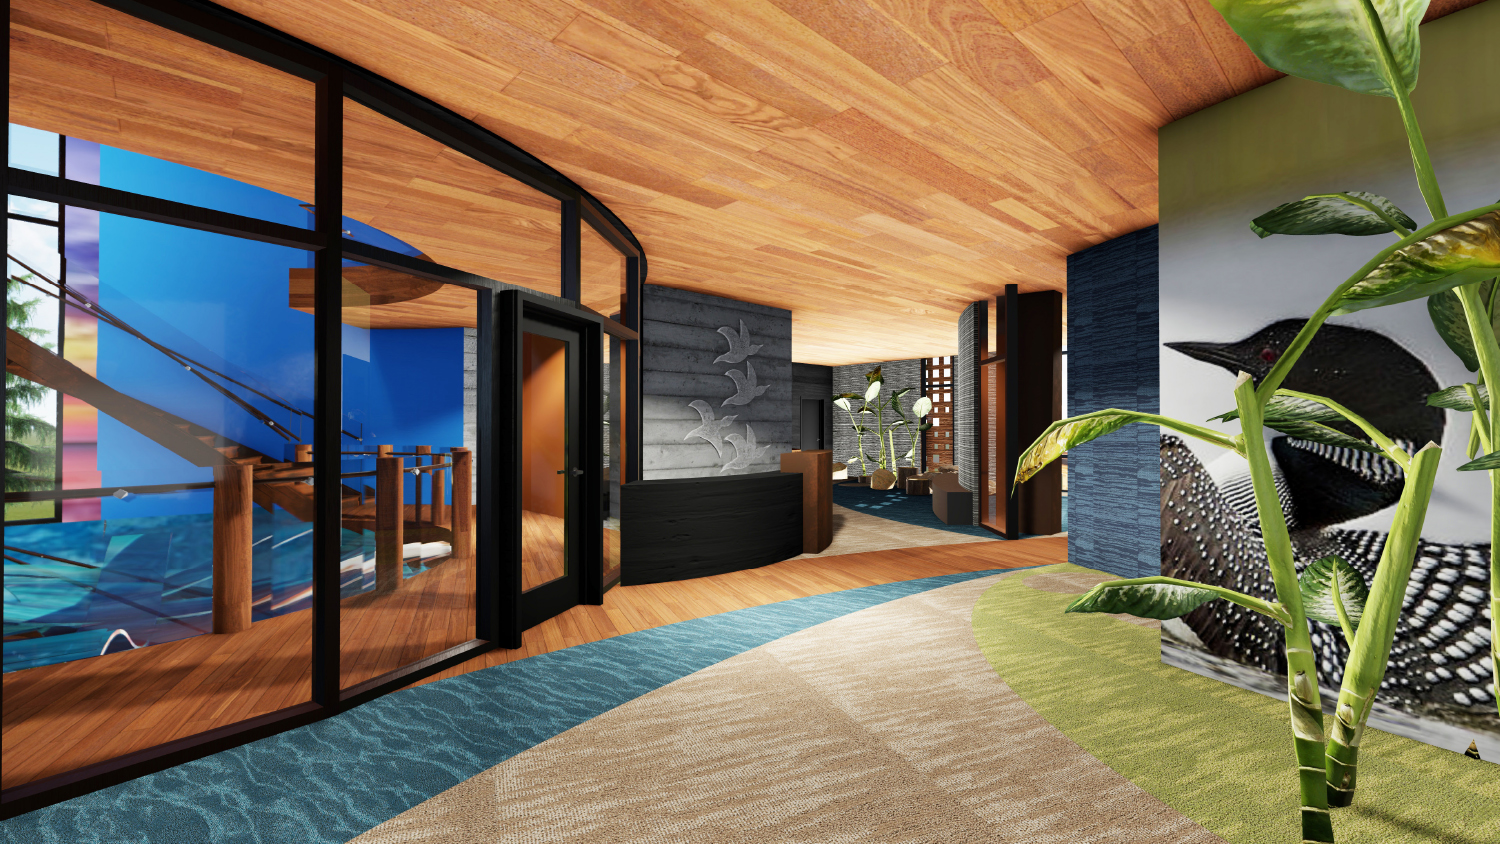 Architectural Render of interior space of building